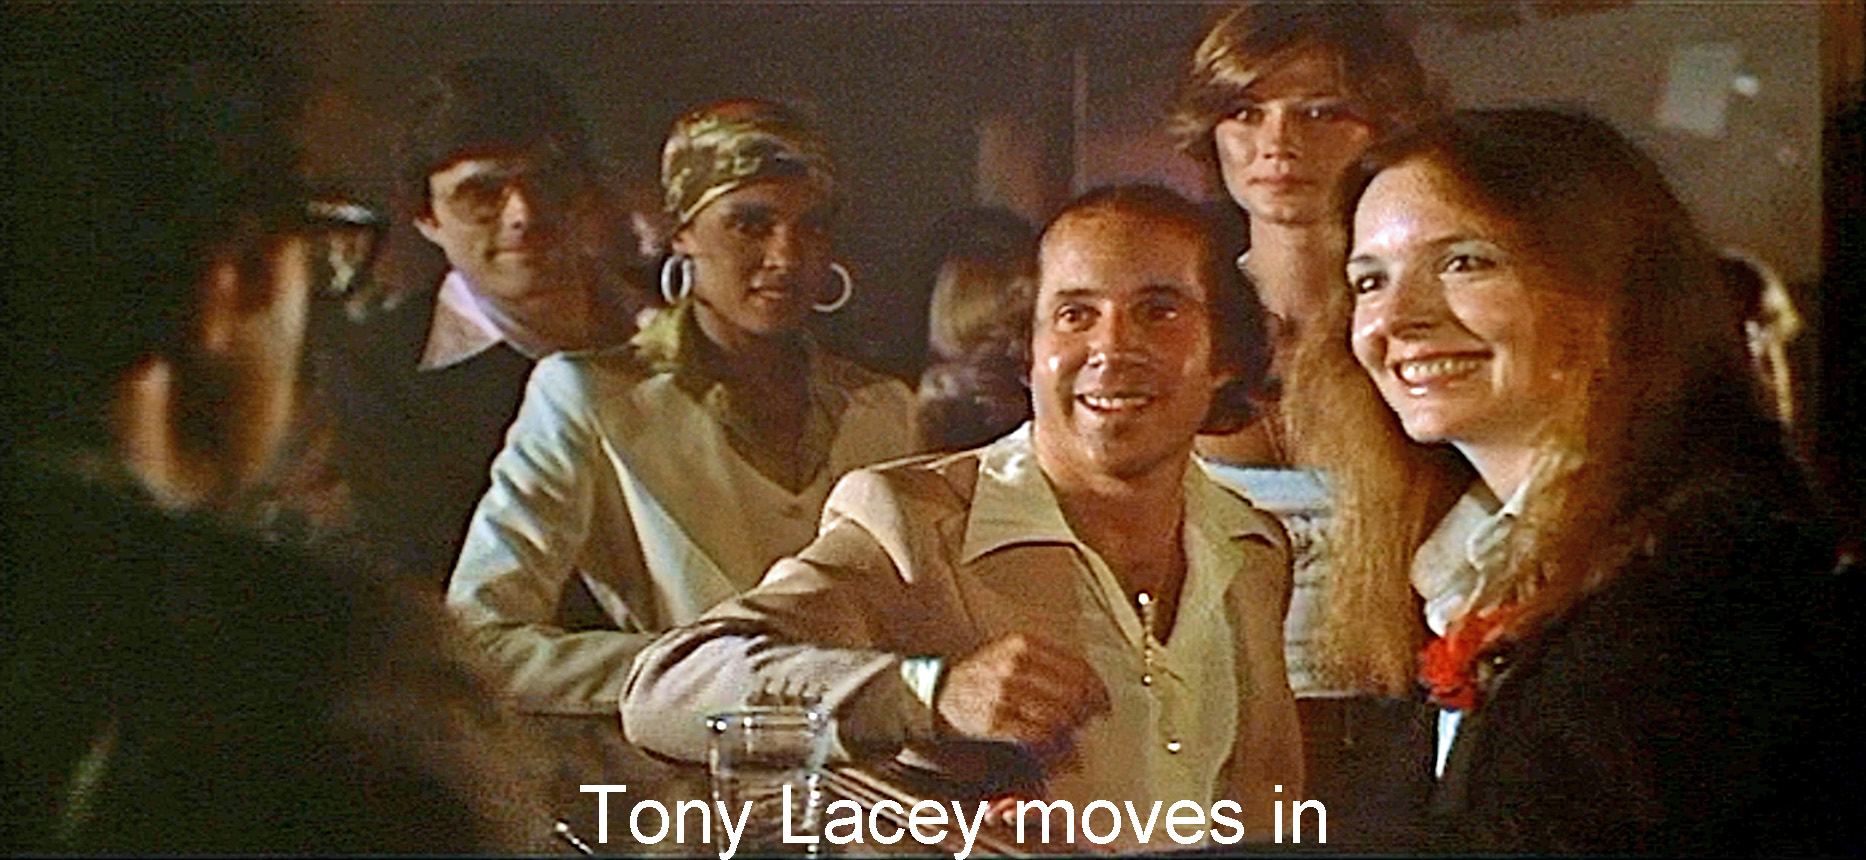  Tony Lacey moves in